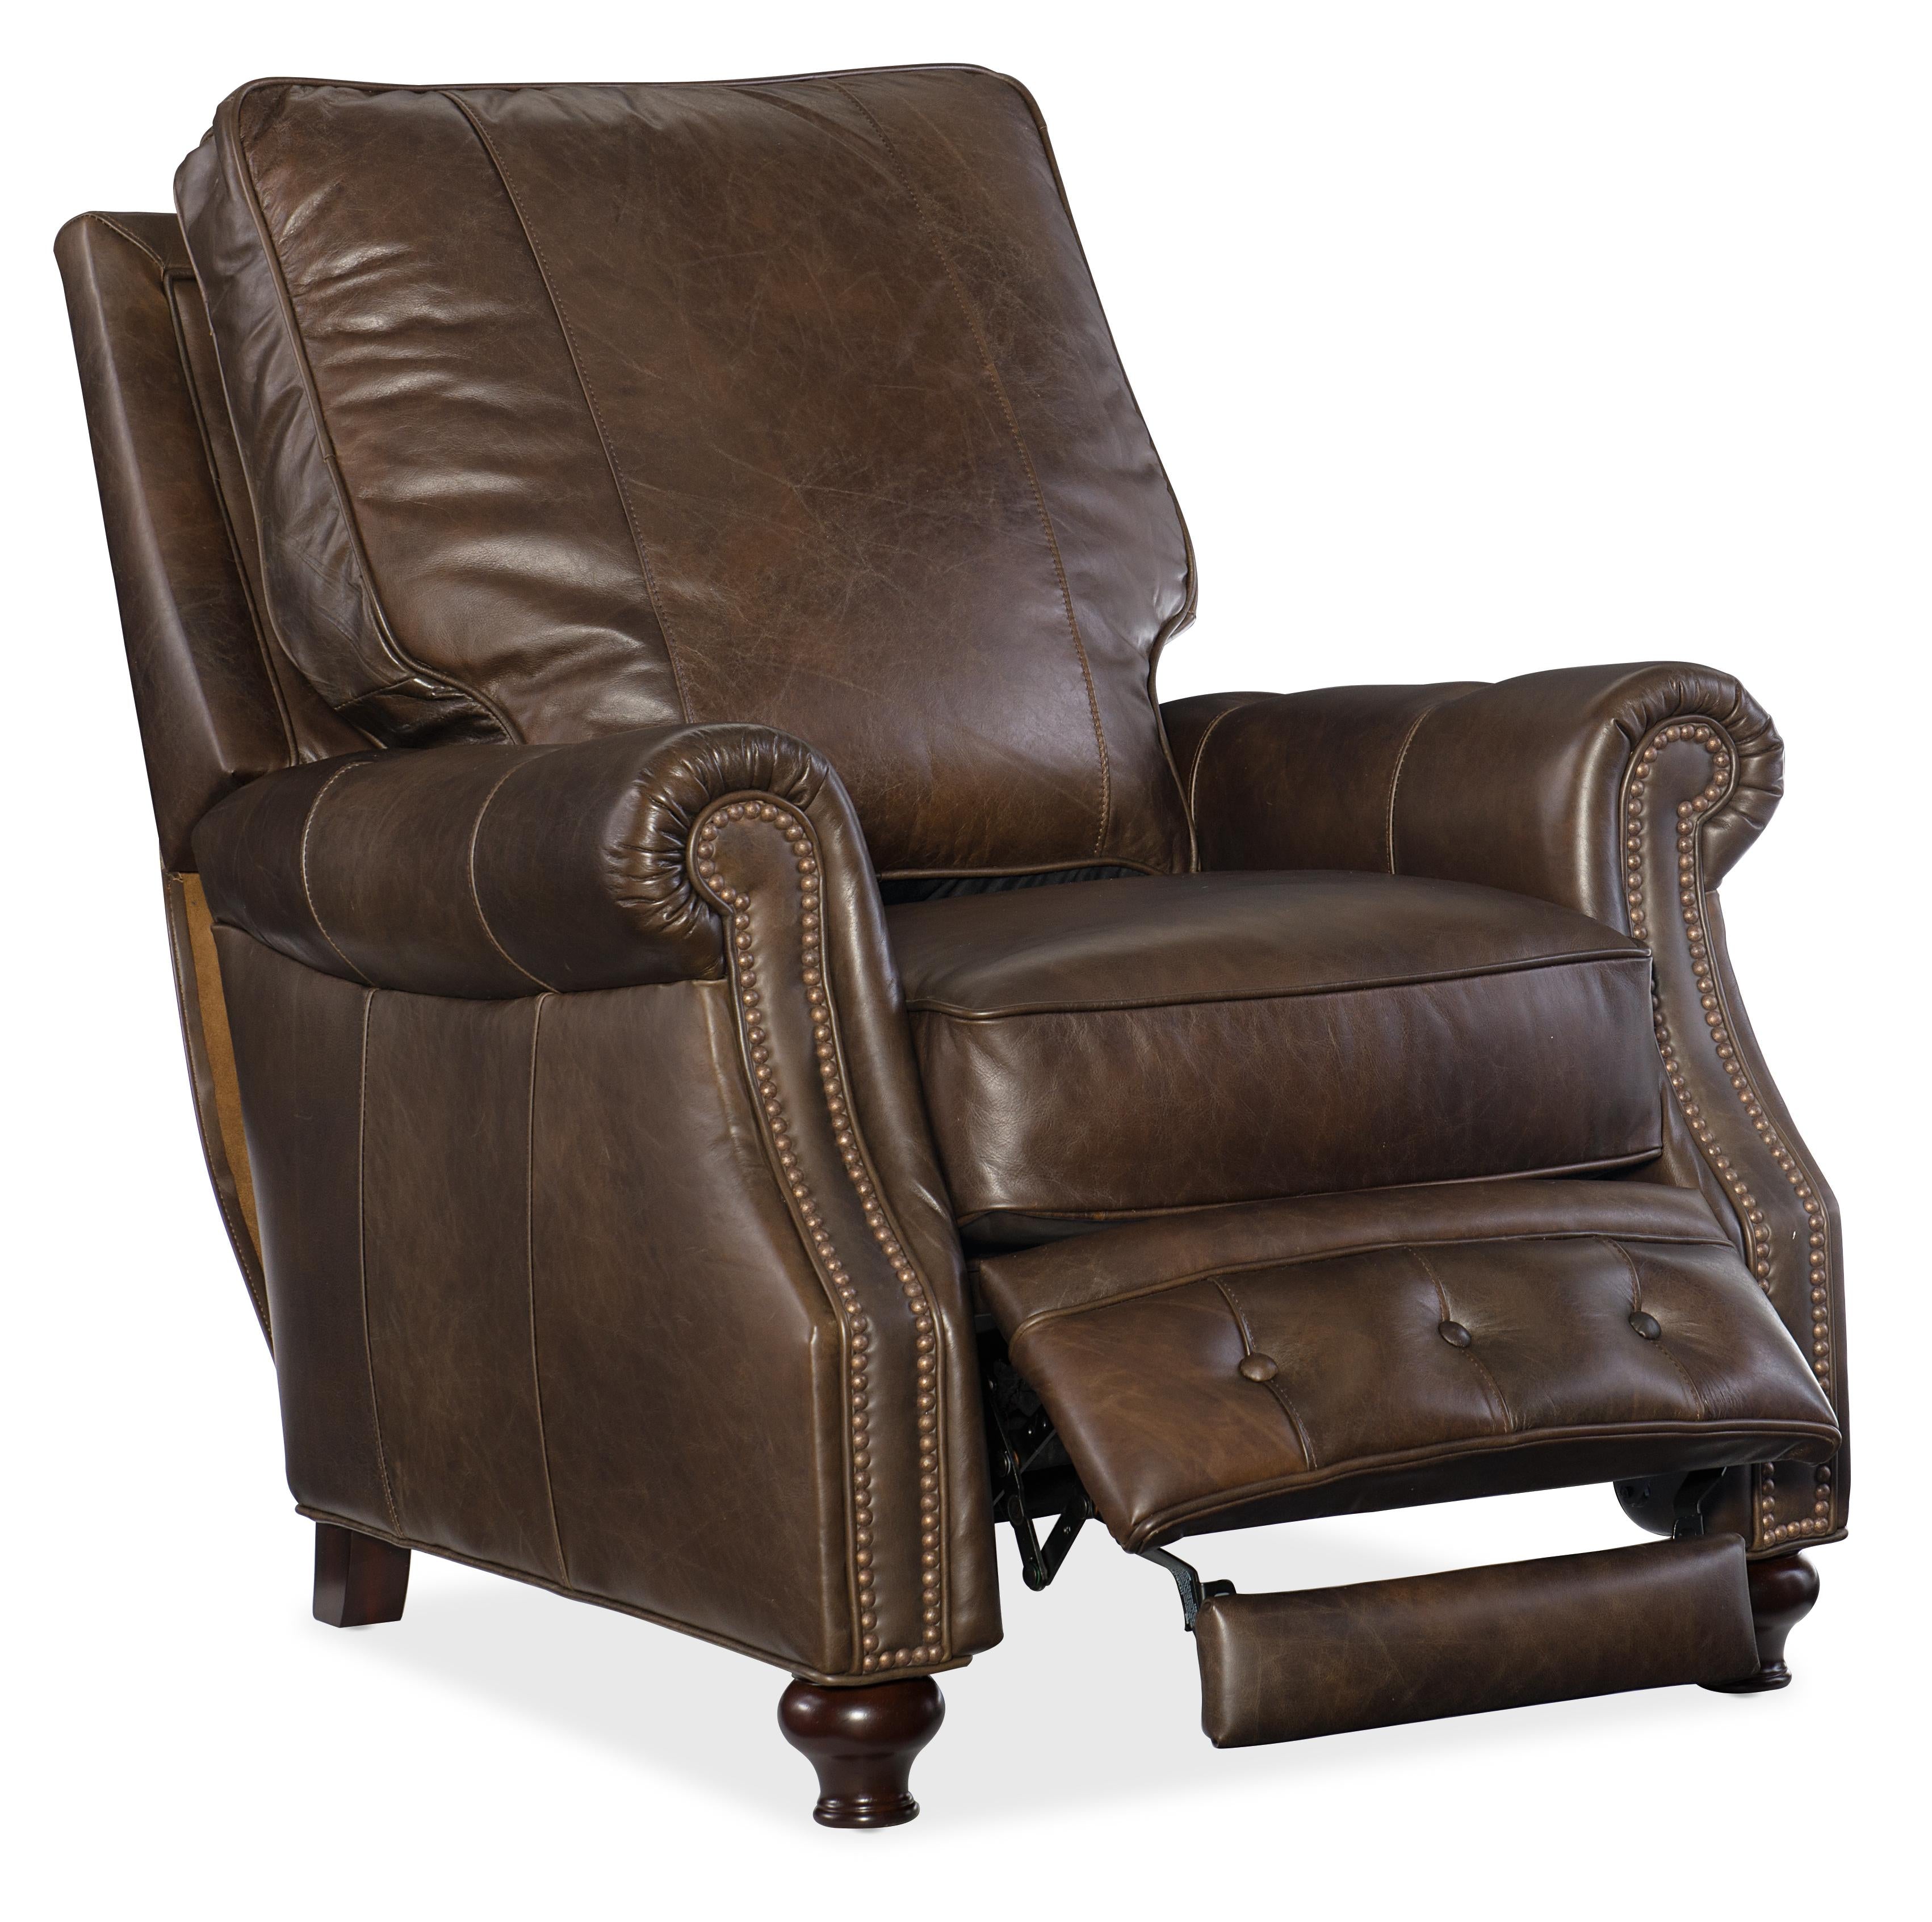 Winslow Recliner Chair - RC150-088 - Luxury Home Furniture (MI)